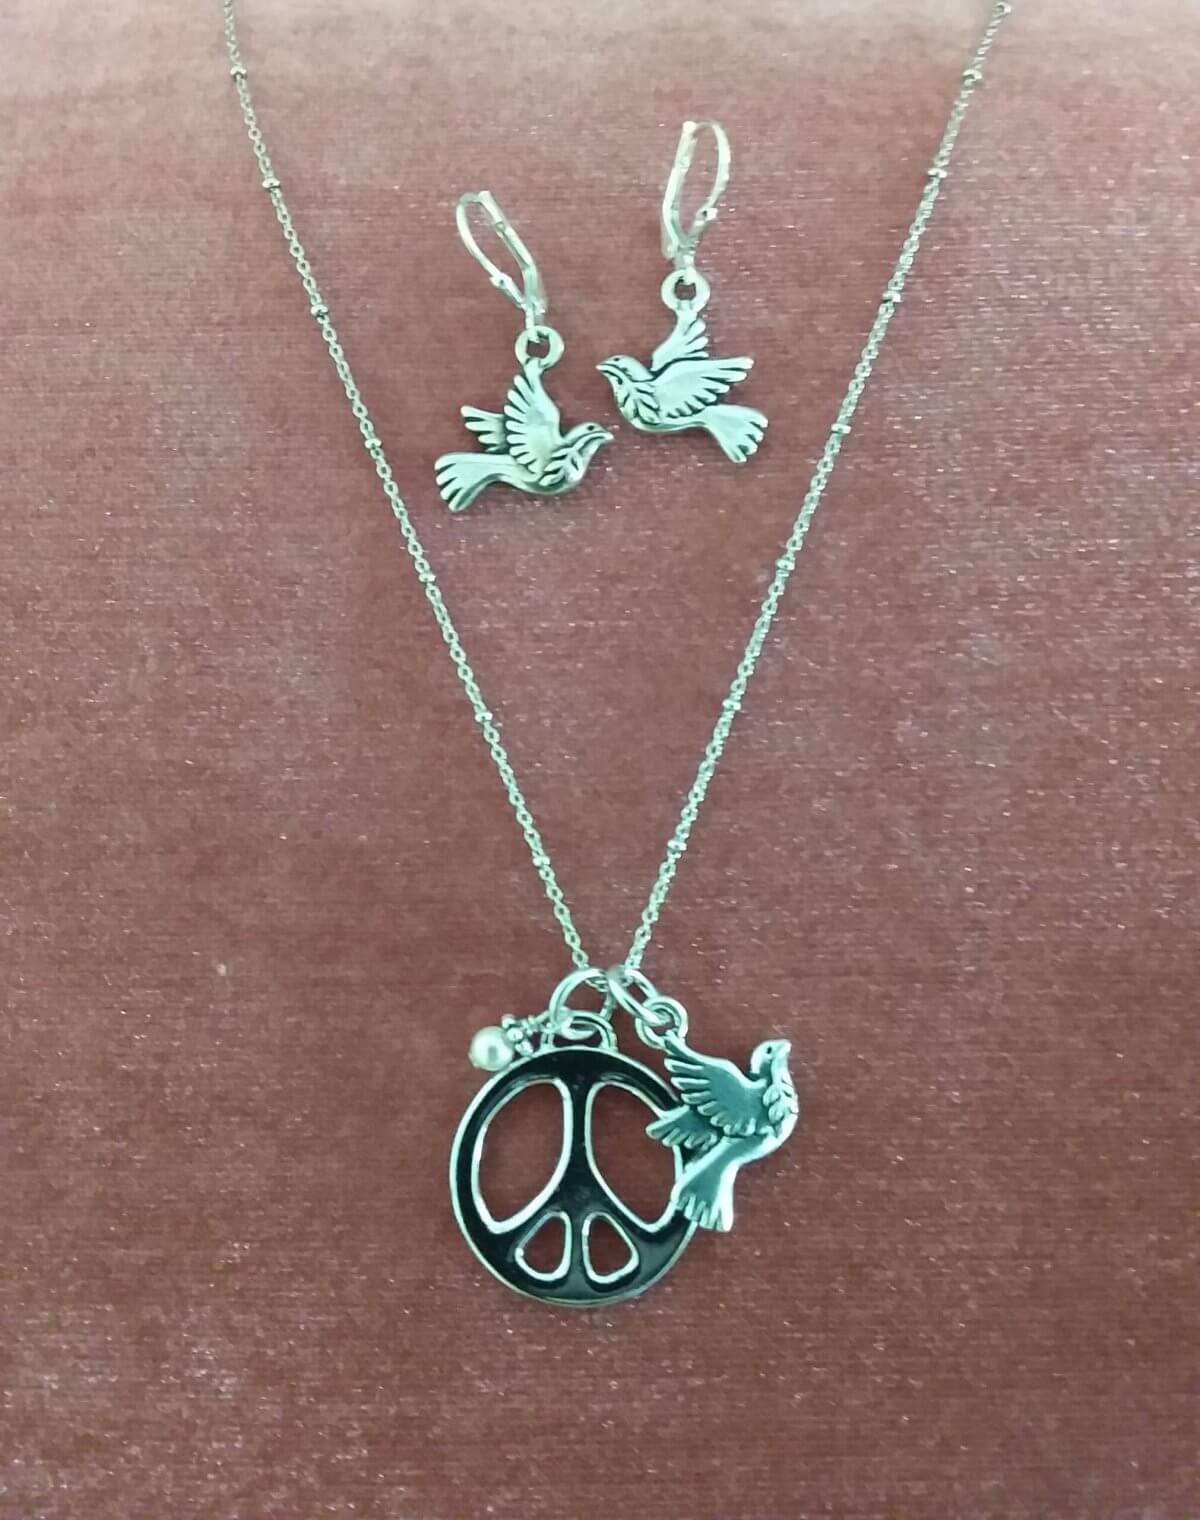 https://lorirae.com/wp-content/uploads/2020/06/Peace-and-Doves-3-scaled-e1591298896298.jpg